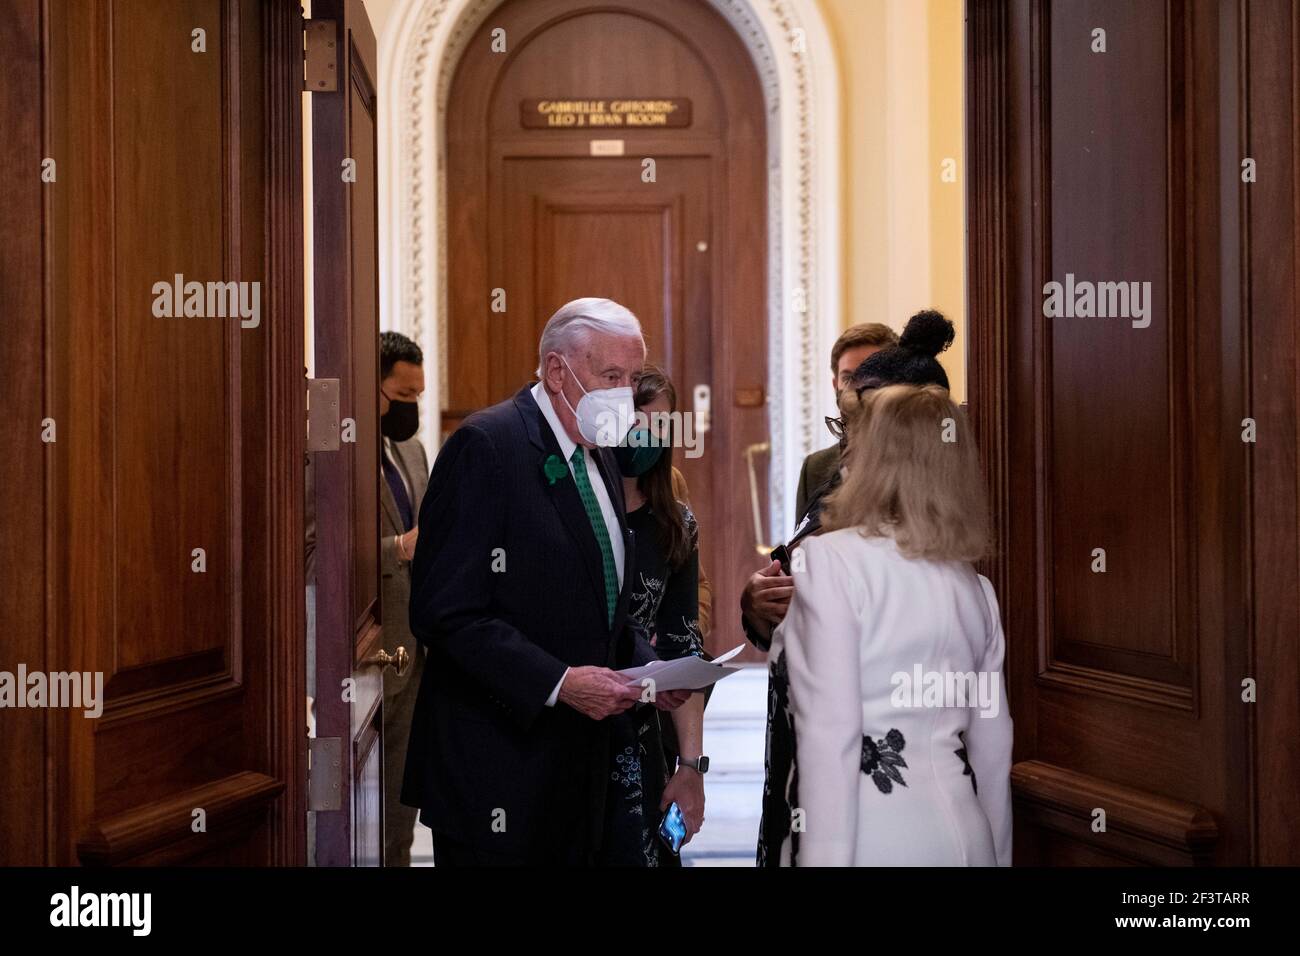 United States Representative Debbie Dingell (Democrat of Michigan), right, chats with United States House Majority Leader Steny Hoyer (Democrat of Maryland) prior to a press conference to begin regarding the Violence Against Women Act, at the U.S. Capitol in Washington, DC, Wednesday, March 17, 2021. Credit: Rod Lamkey/CNP | usage worldwide Stock Photo